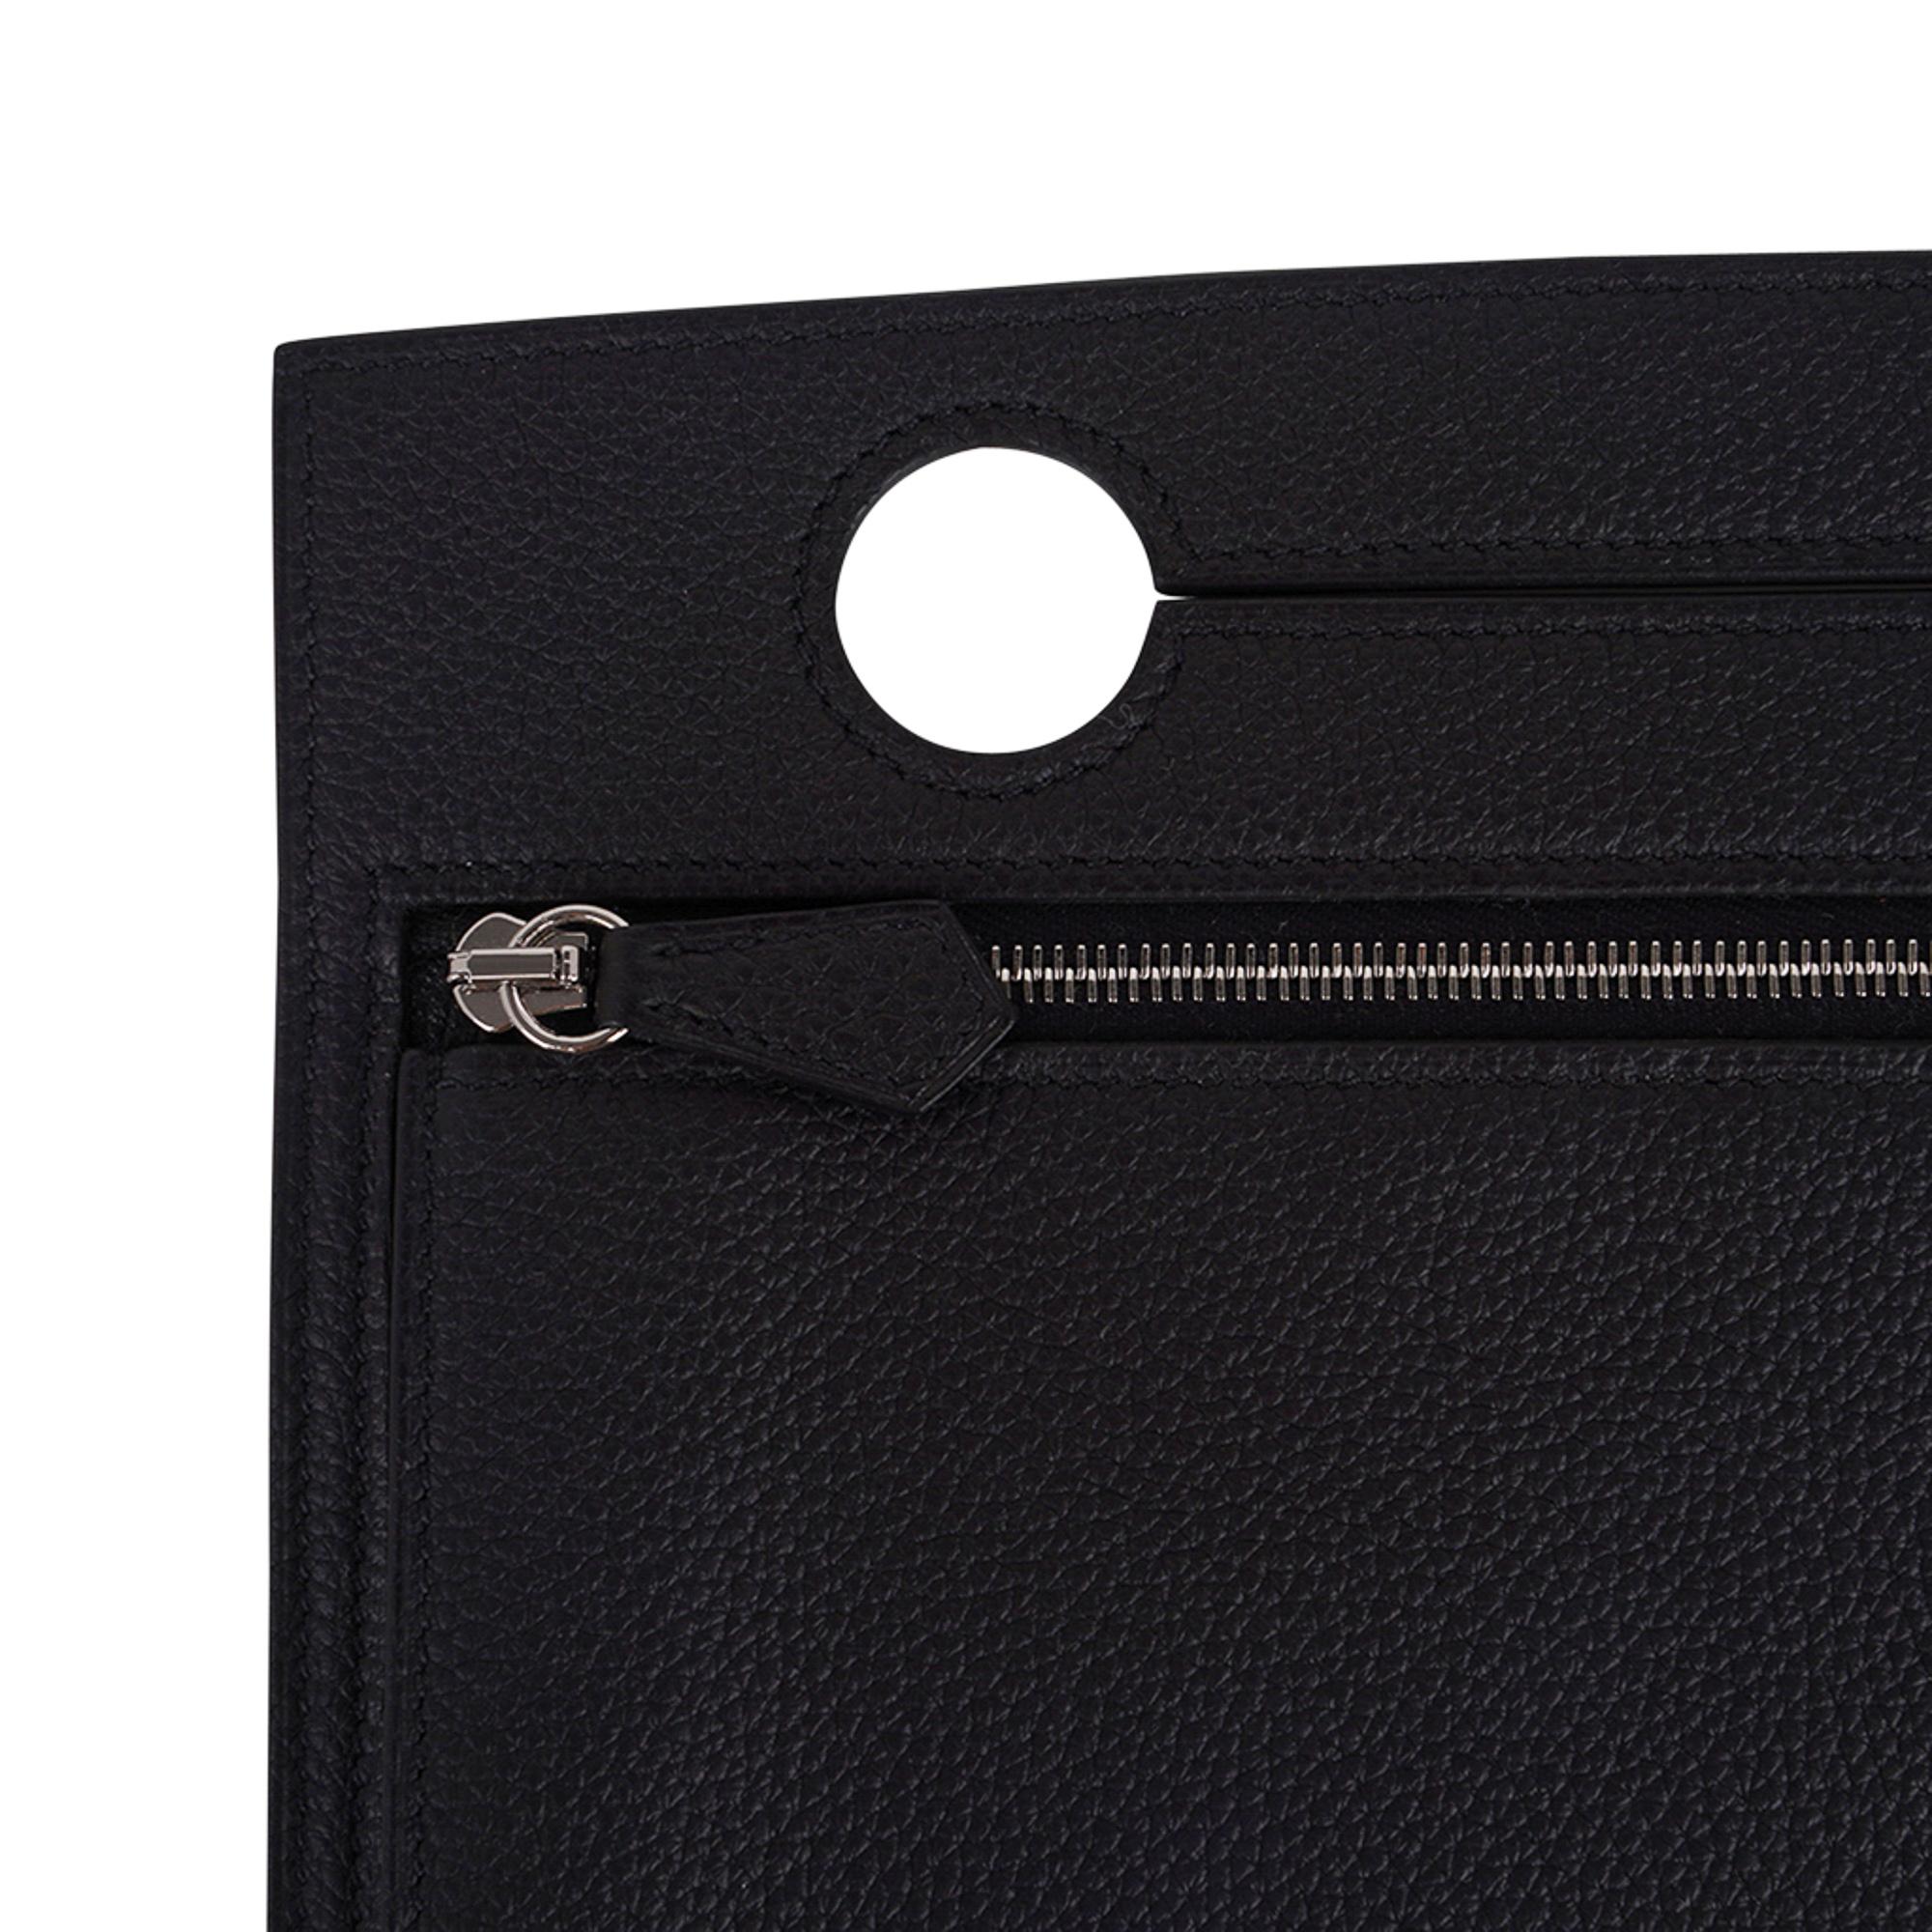 Mightychic offers a guaranteed authentic Hermes Backpocket 30 Pouch featured in Black.
Fits 30 cm Birkin bag, however you can certainly use it on your 25 Birkin bag.
Beautiful in Togo leather with Palladium hardware.
This flat Backpocket fits easily